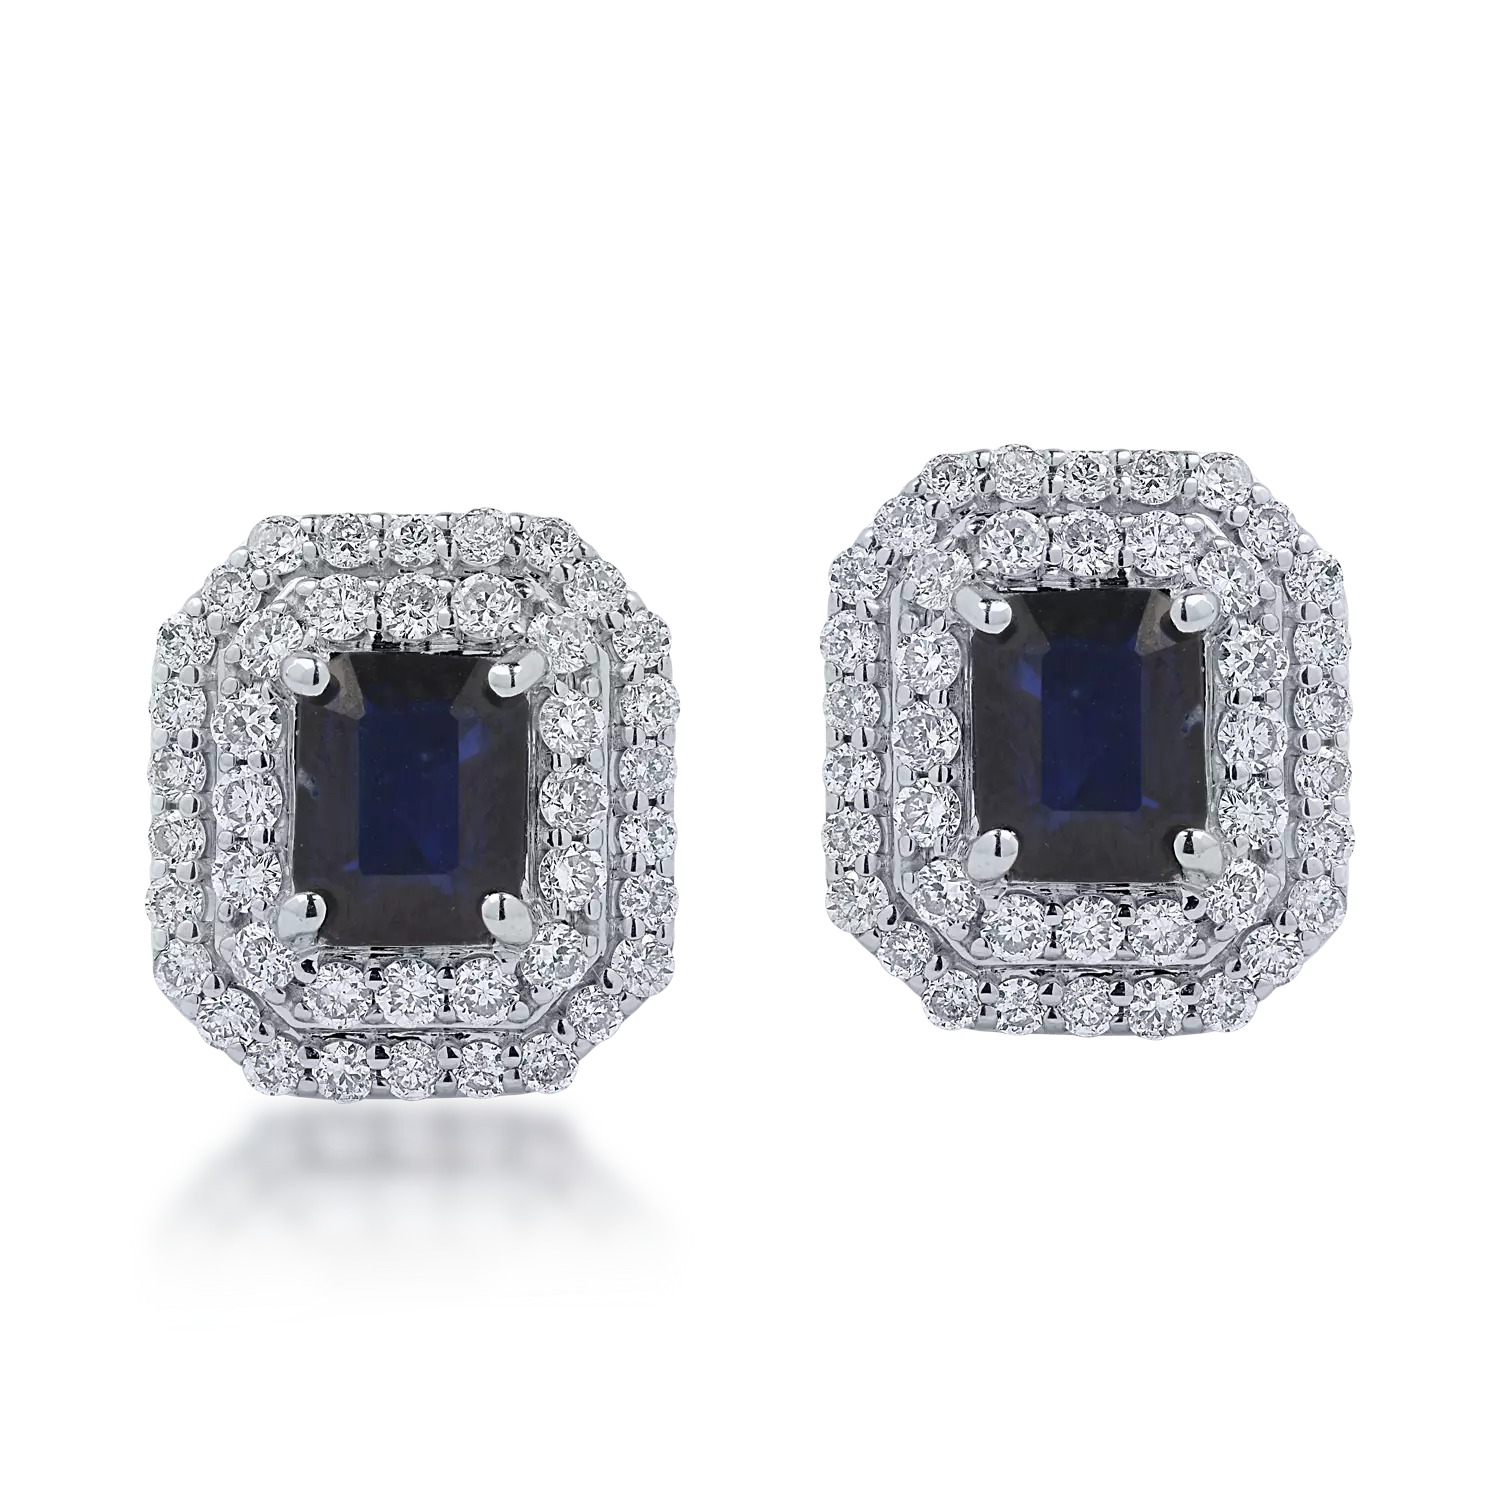 White gold earrings with 1.03ct sapphires and 0.49ct diamonds